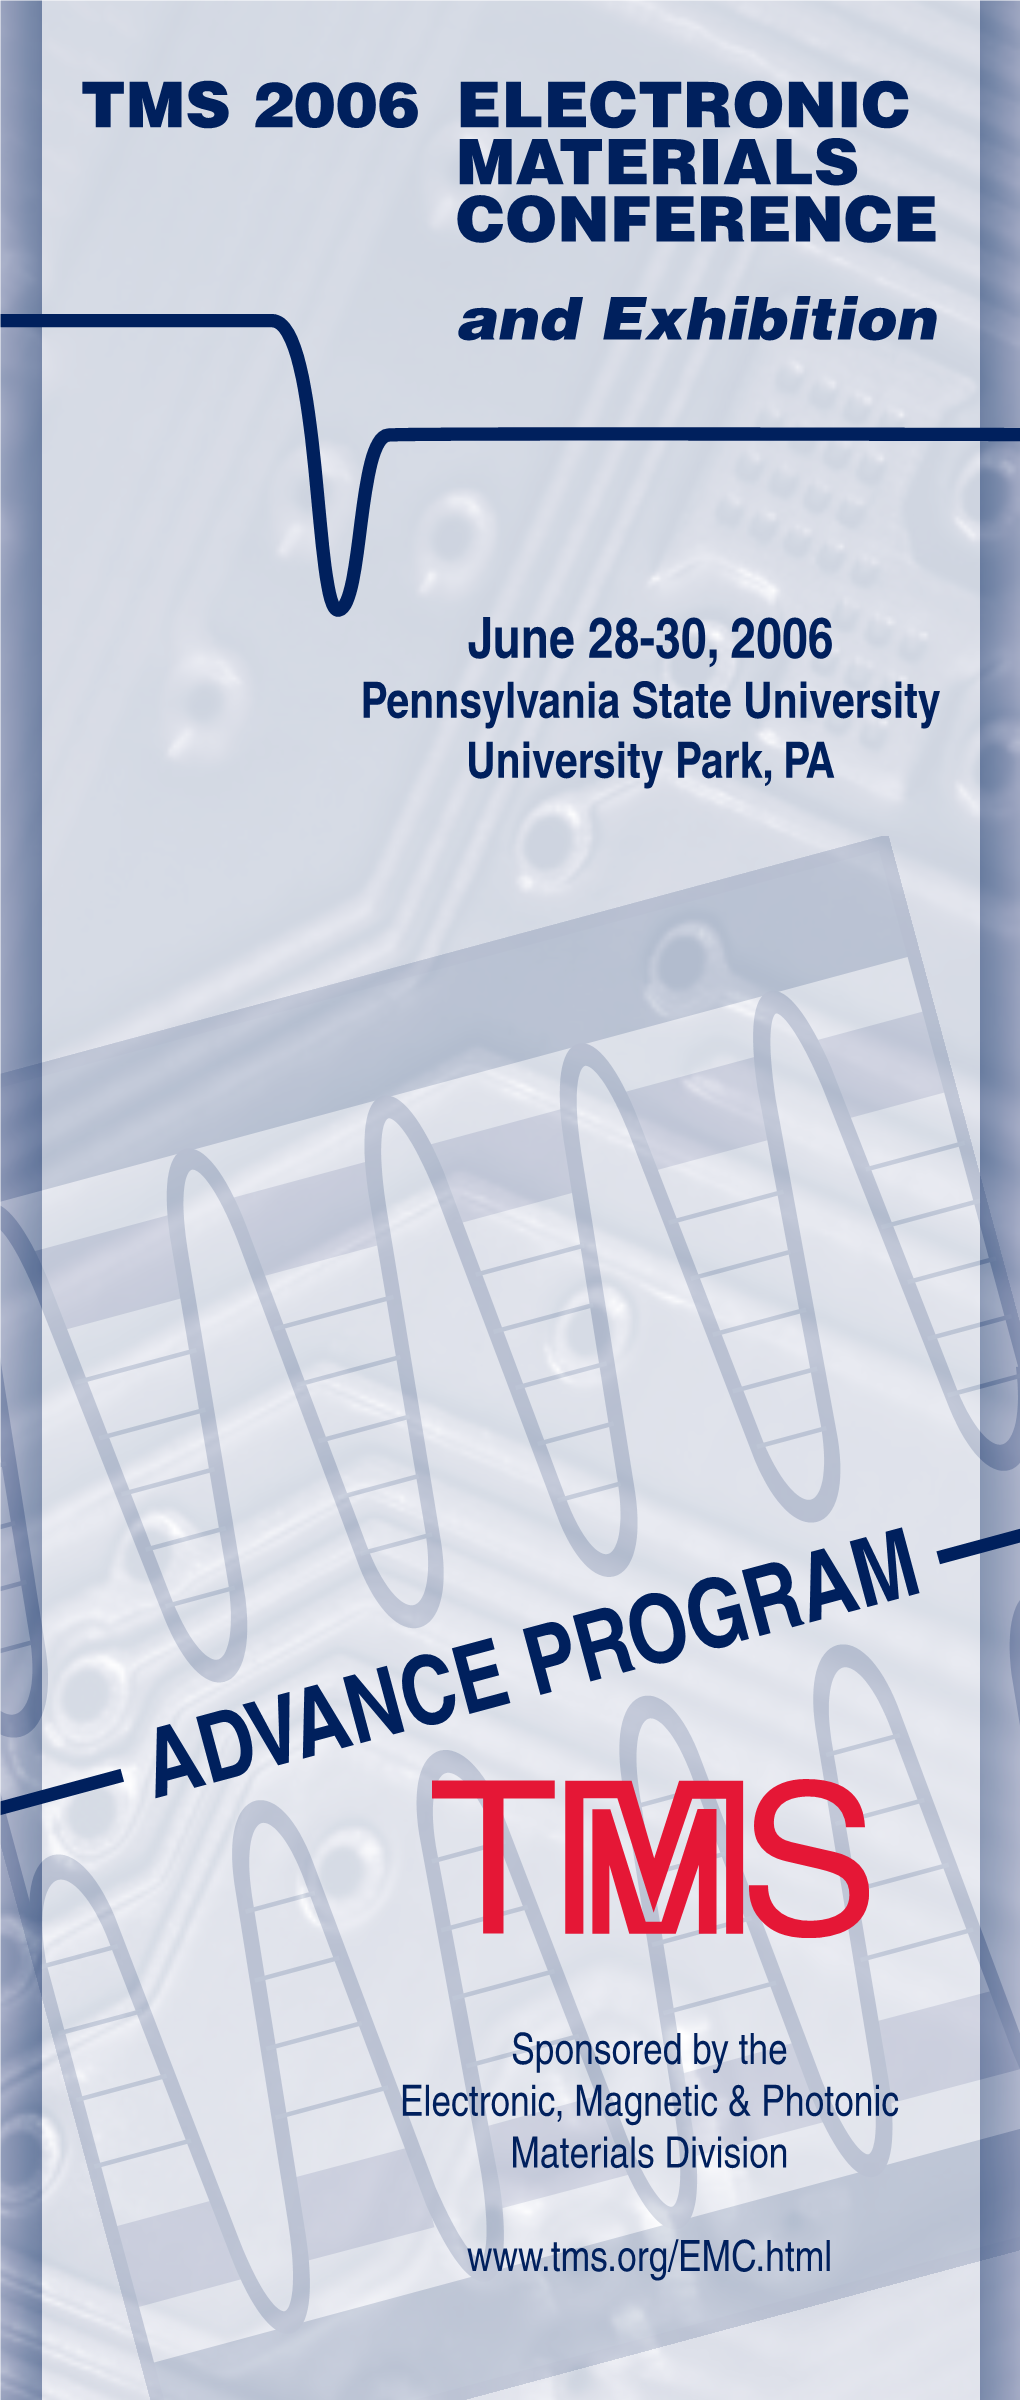 June 28-30, 2006 Pennsylvania State University University Park, PA the Premier Annual Forum on the Preparation and Characterization of Electronic Materials